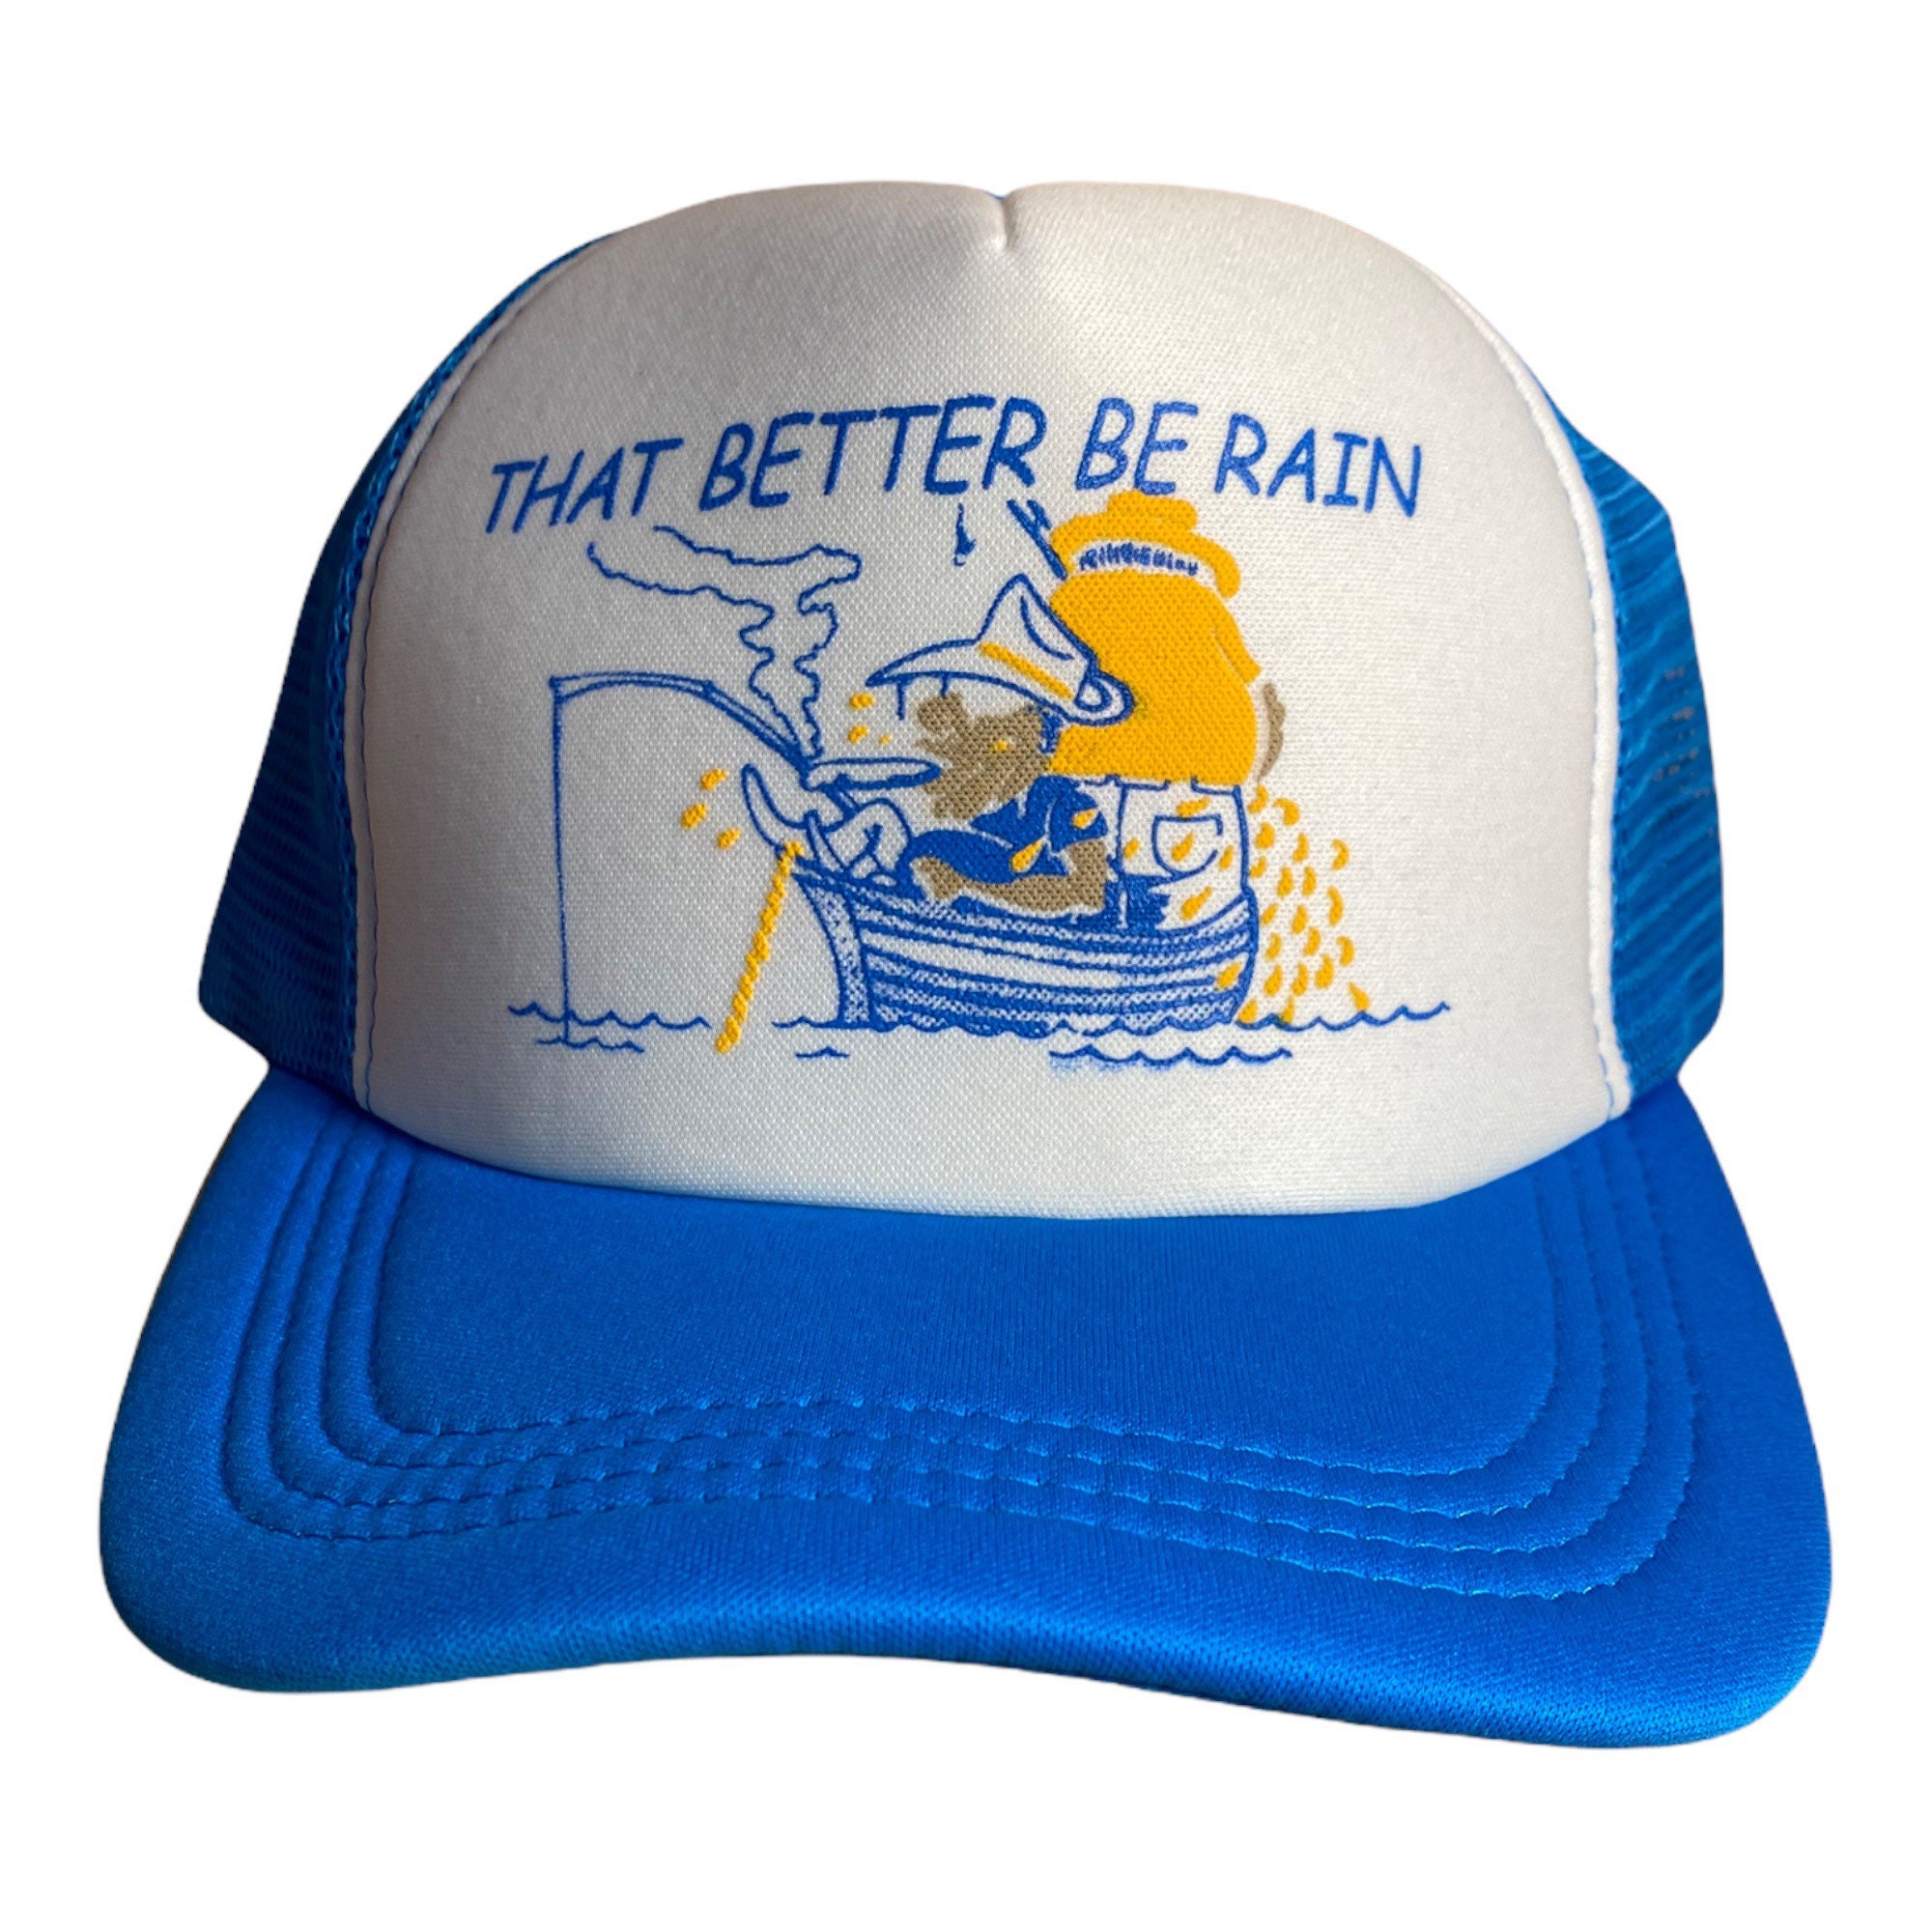 Vintage Fishing Hat // Two Tone Trucker Cap // That Better Be Rain Funny Hat  // Novelty Cap // Boating Fishing Captain // Party Costume Cap -  Canada